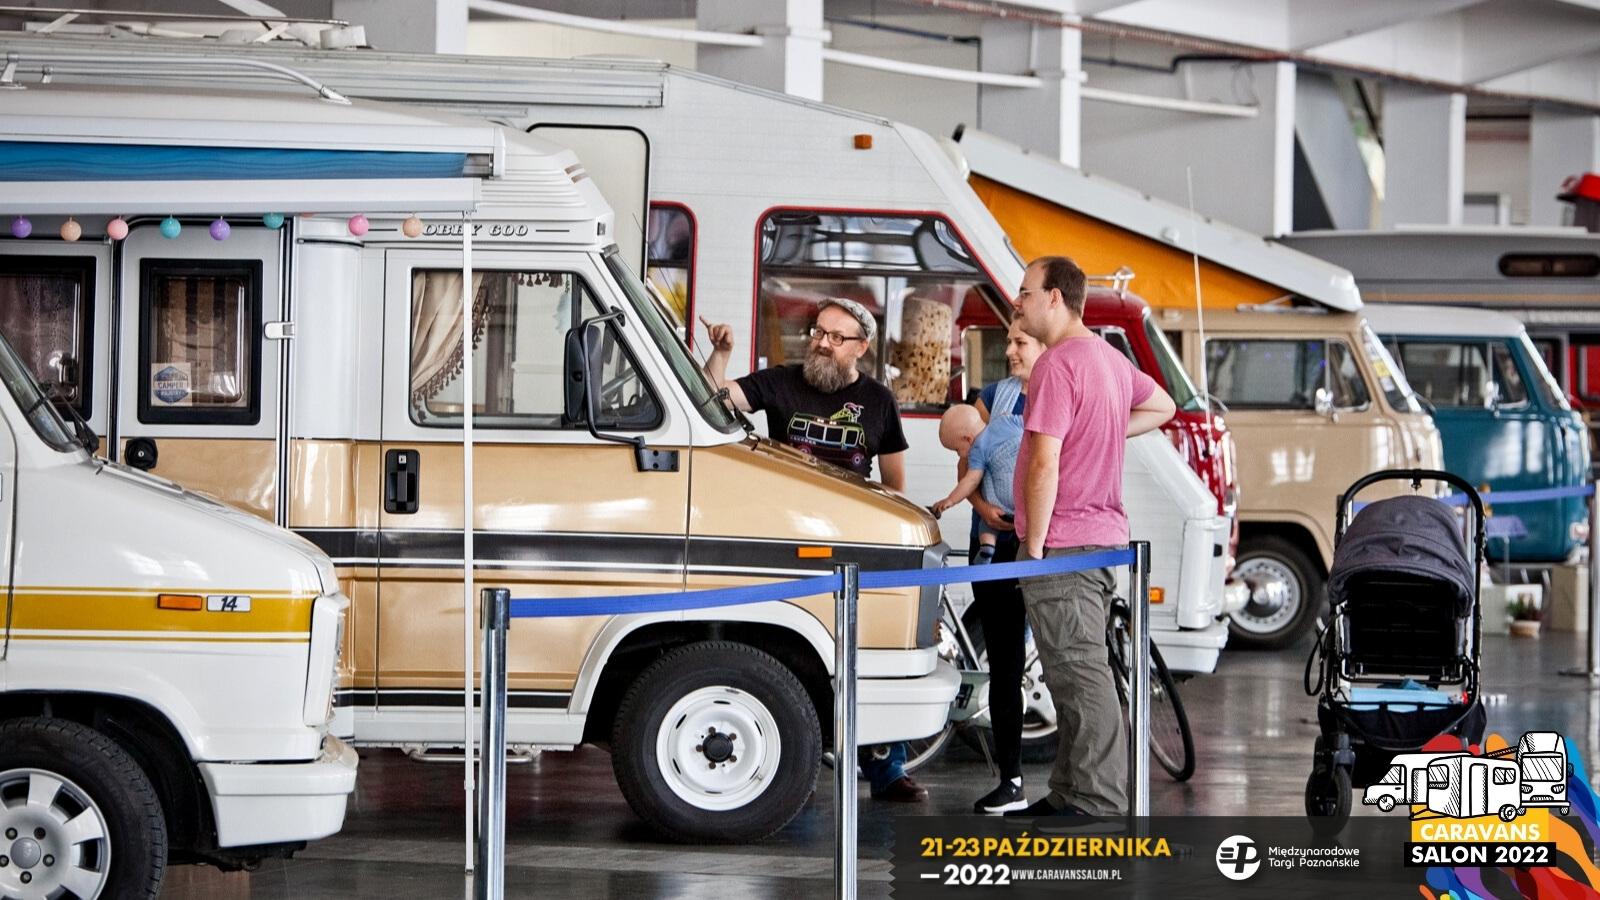 This is for sure! The 5th edition of Caravans Salon Poland in Poznań from 21 to 23 October 2022 – image 2